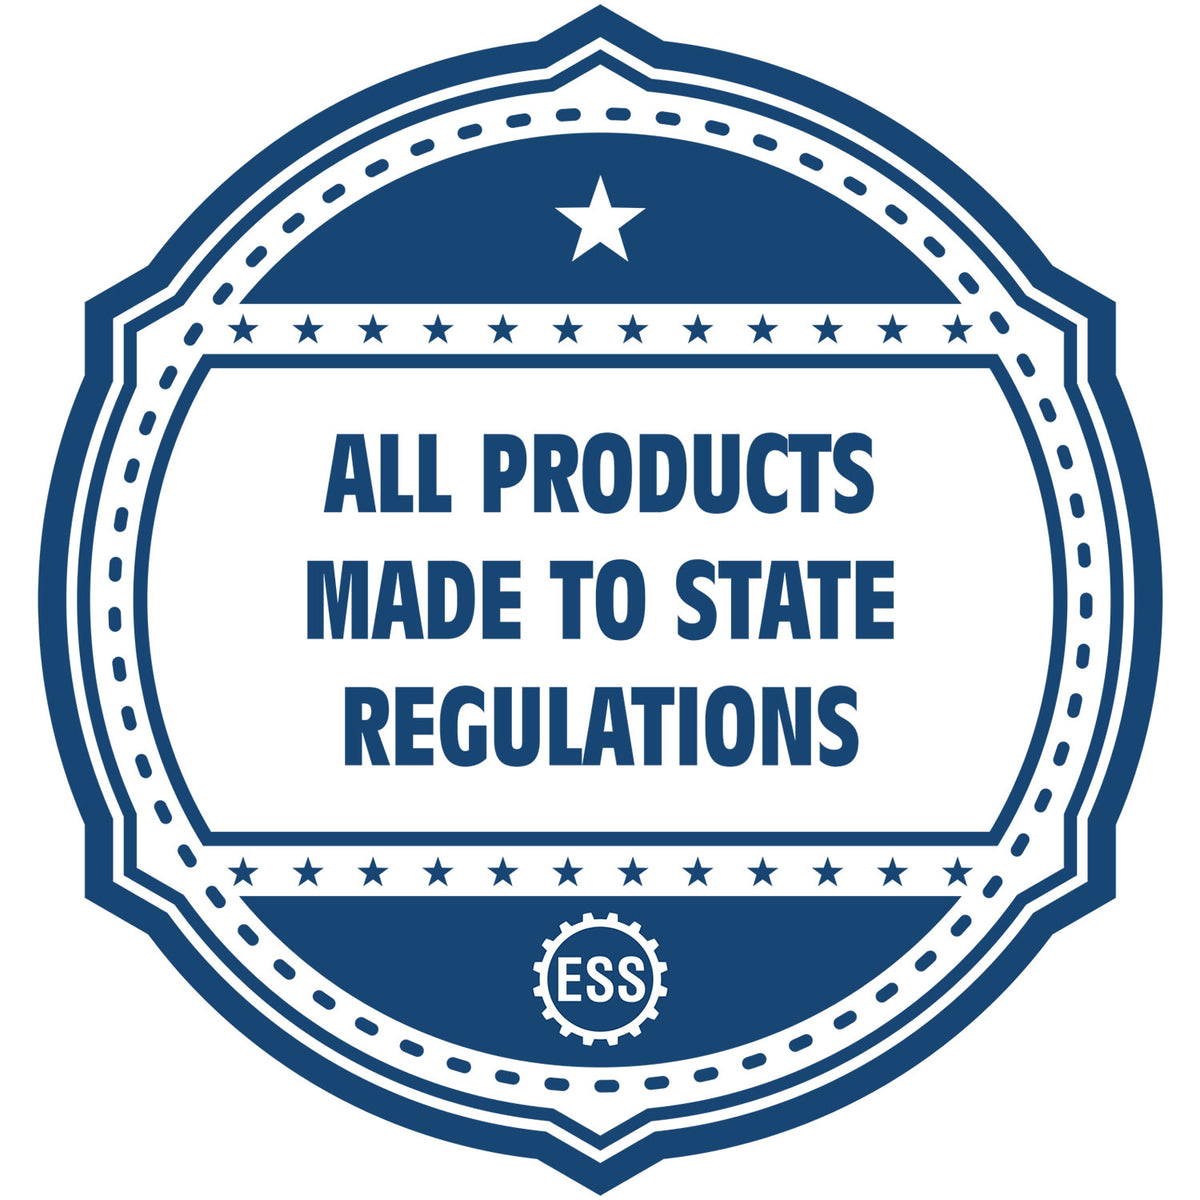 A blue icon or badge for the Slim Pre-Inked Colorado Professional Geologist Seal Stamp showing that this product is made in compliance with state regulations.